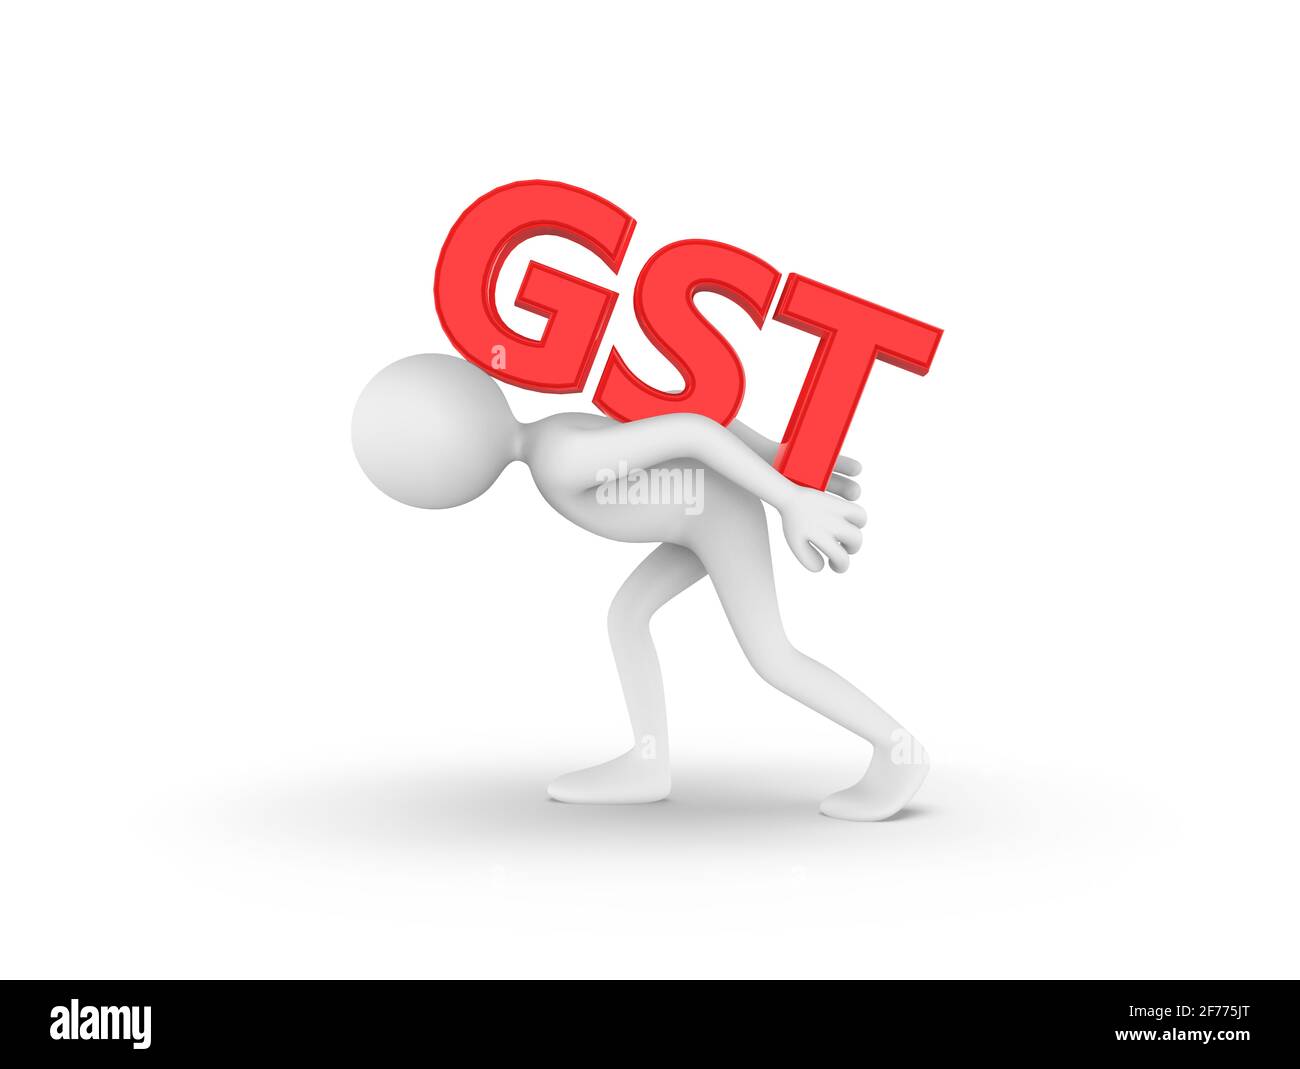 3D illustration of a cartoon man carrying GST text showing the burden of  Goods and services Tax Stock Photo - Alamy